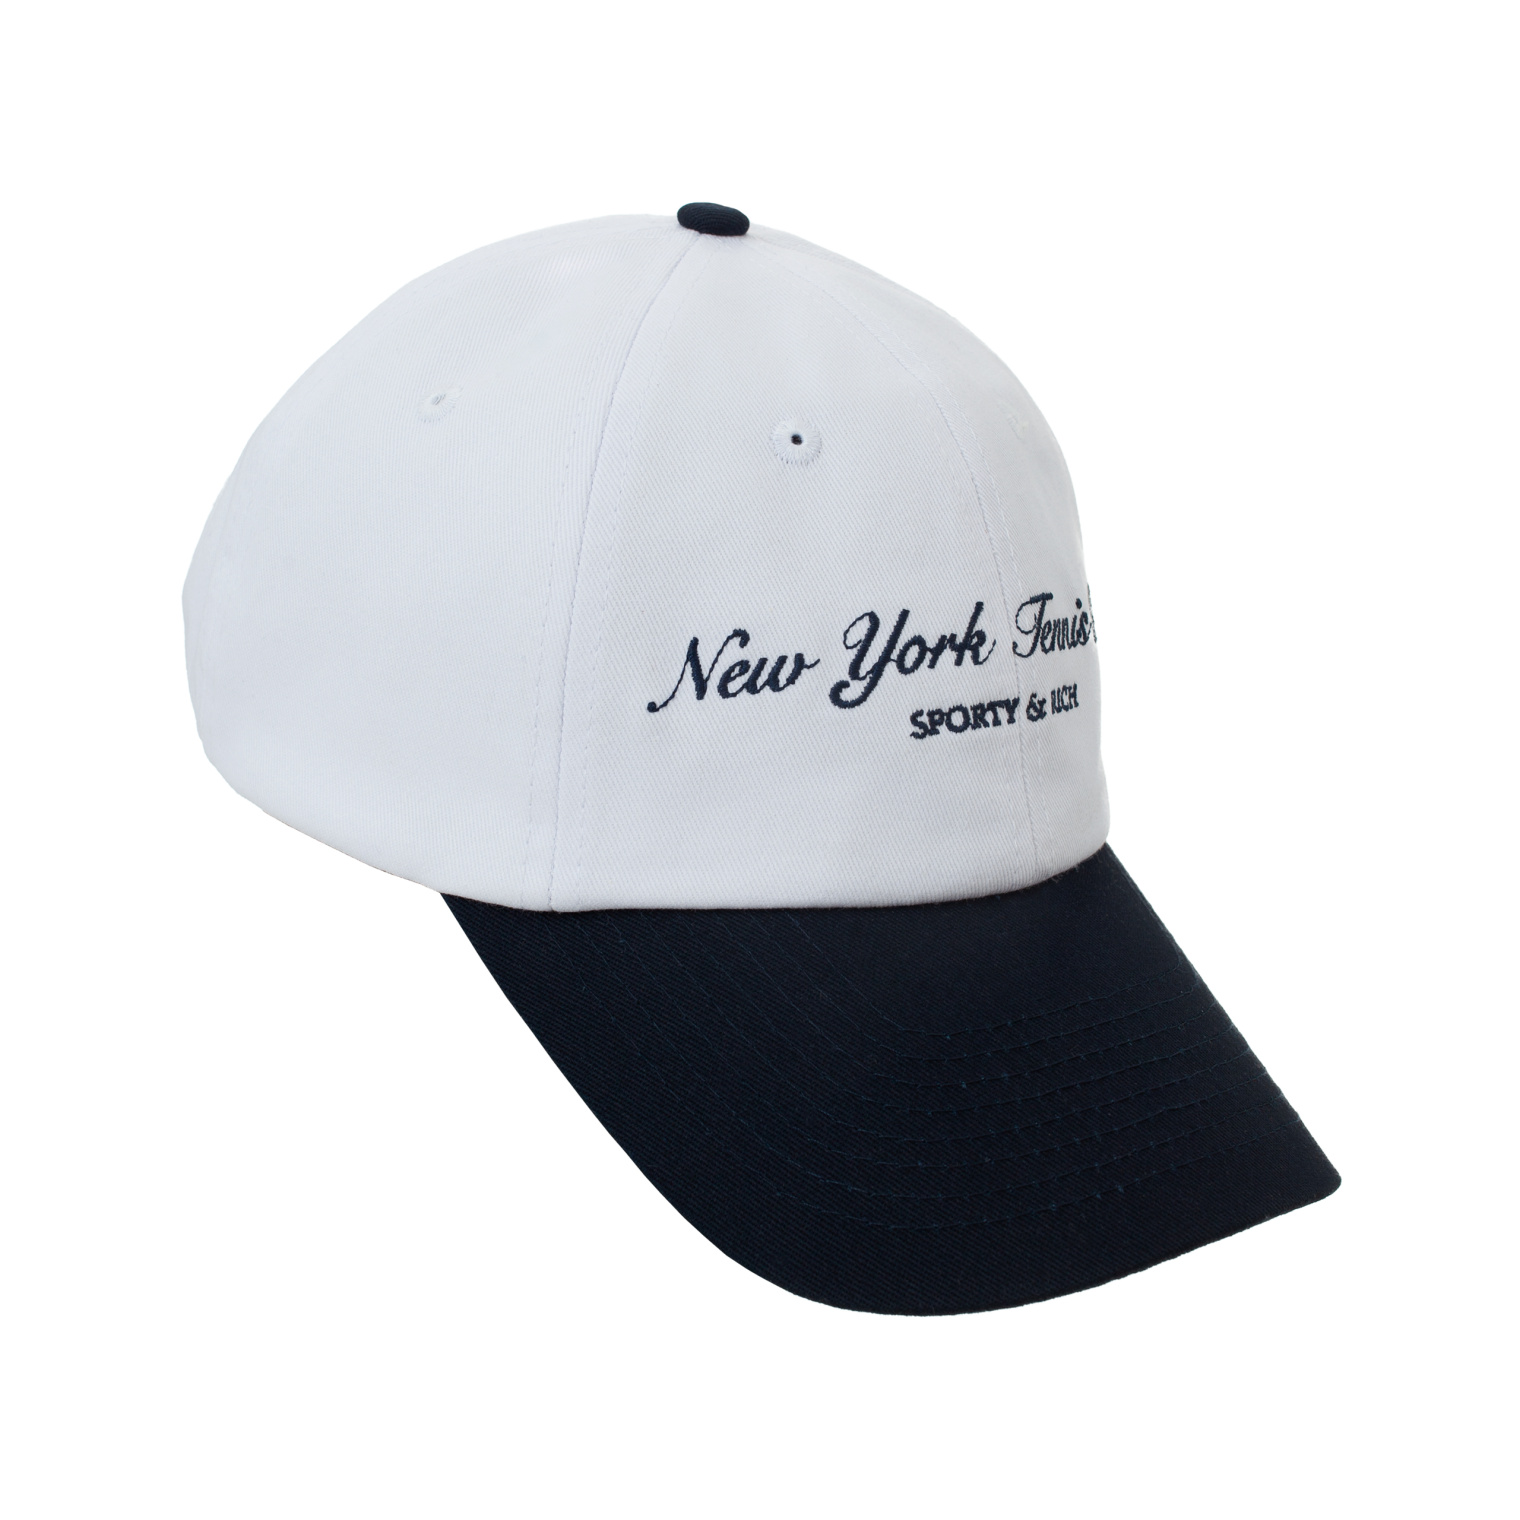 SPORTY & RICH \'NY Tennis Club\' embroidered cap